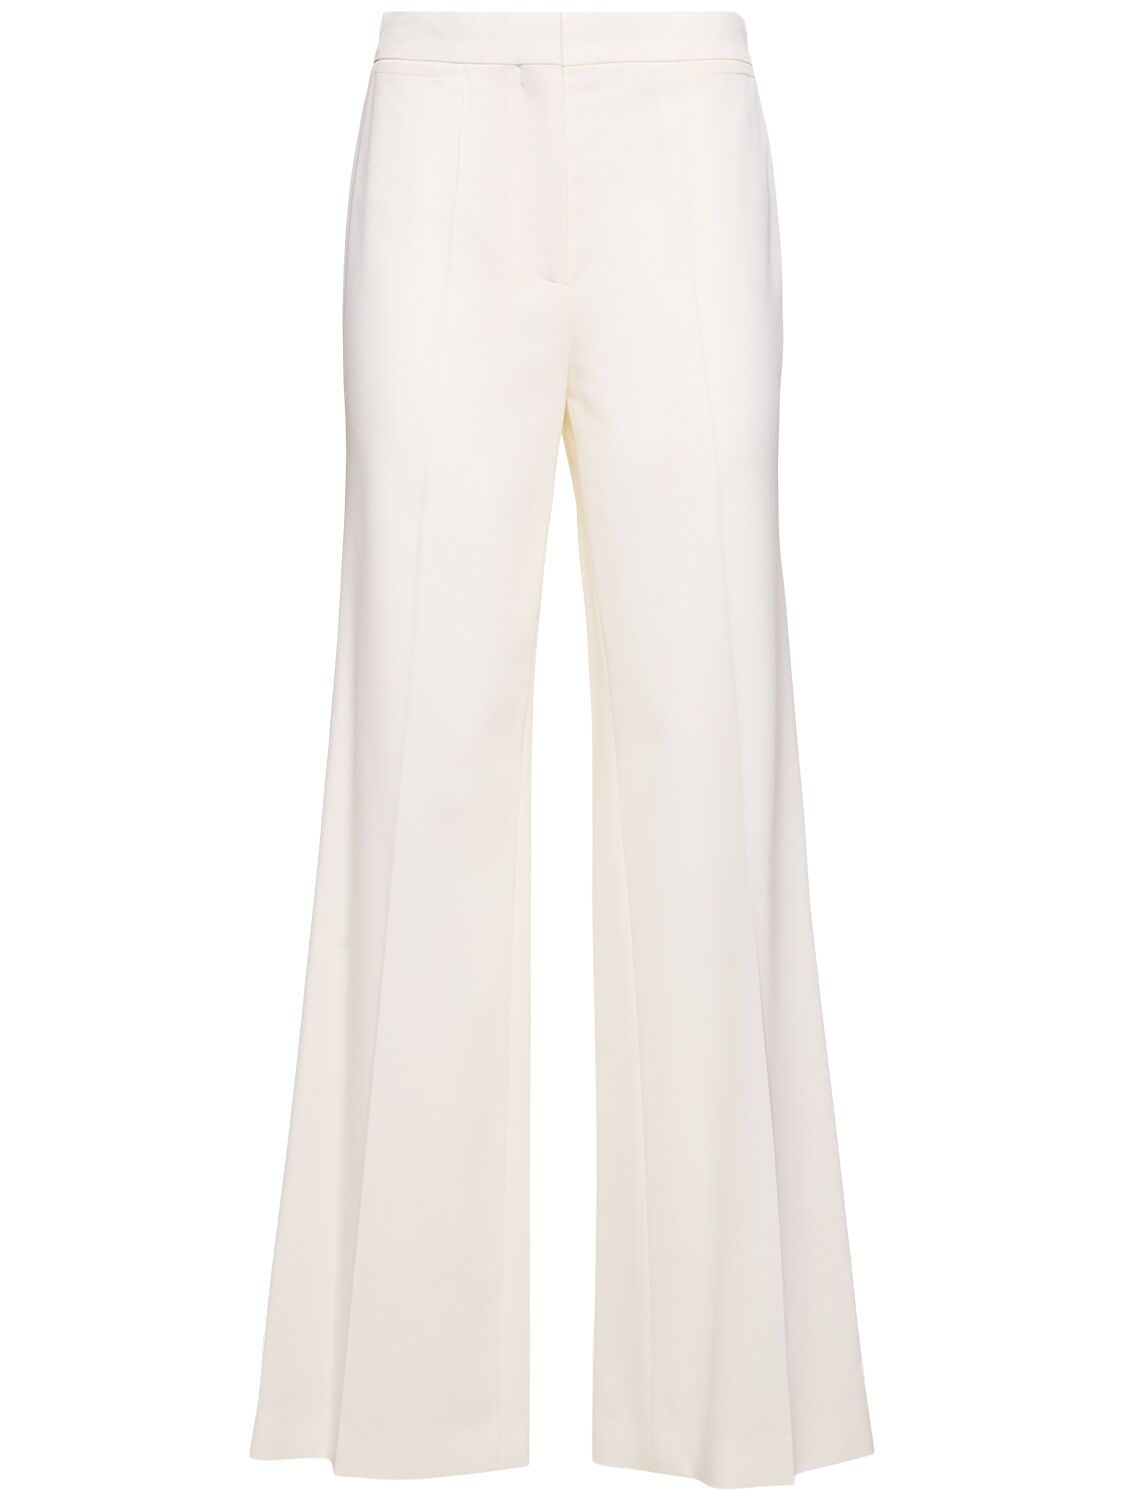 Tailored Wool Blend Flared Pants